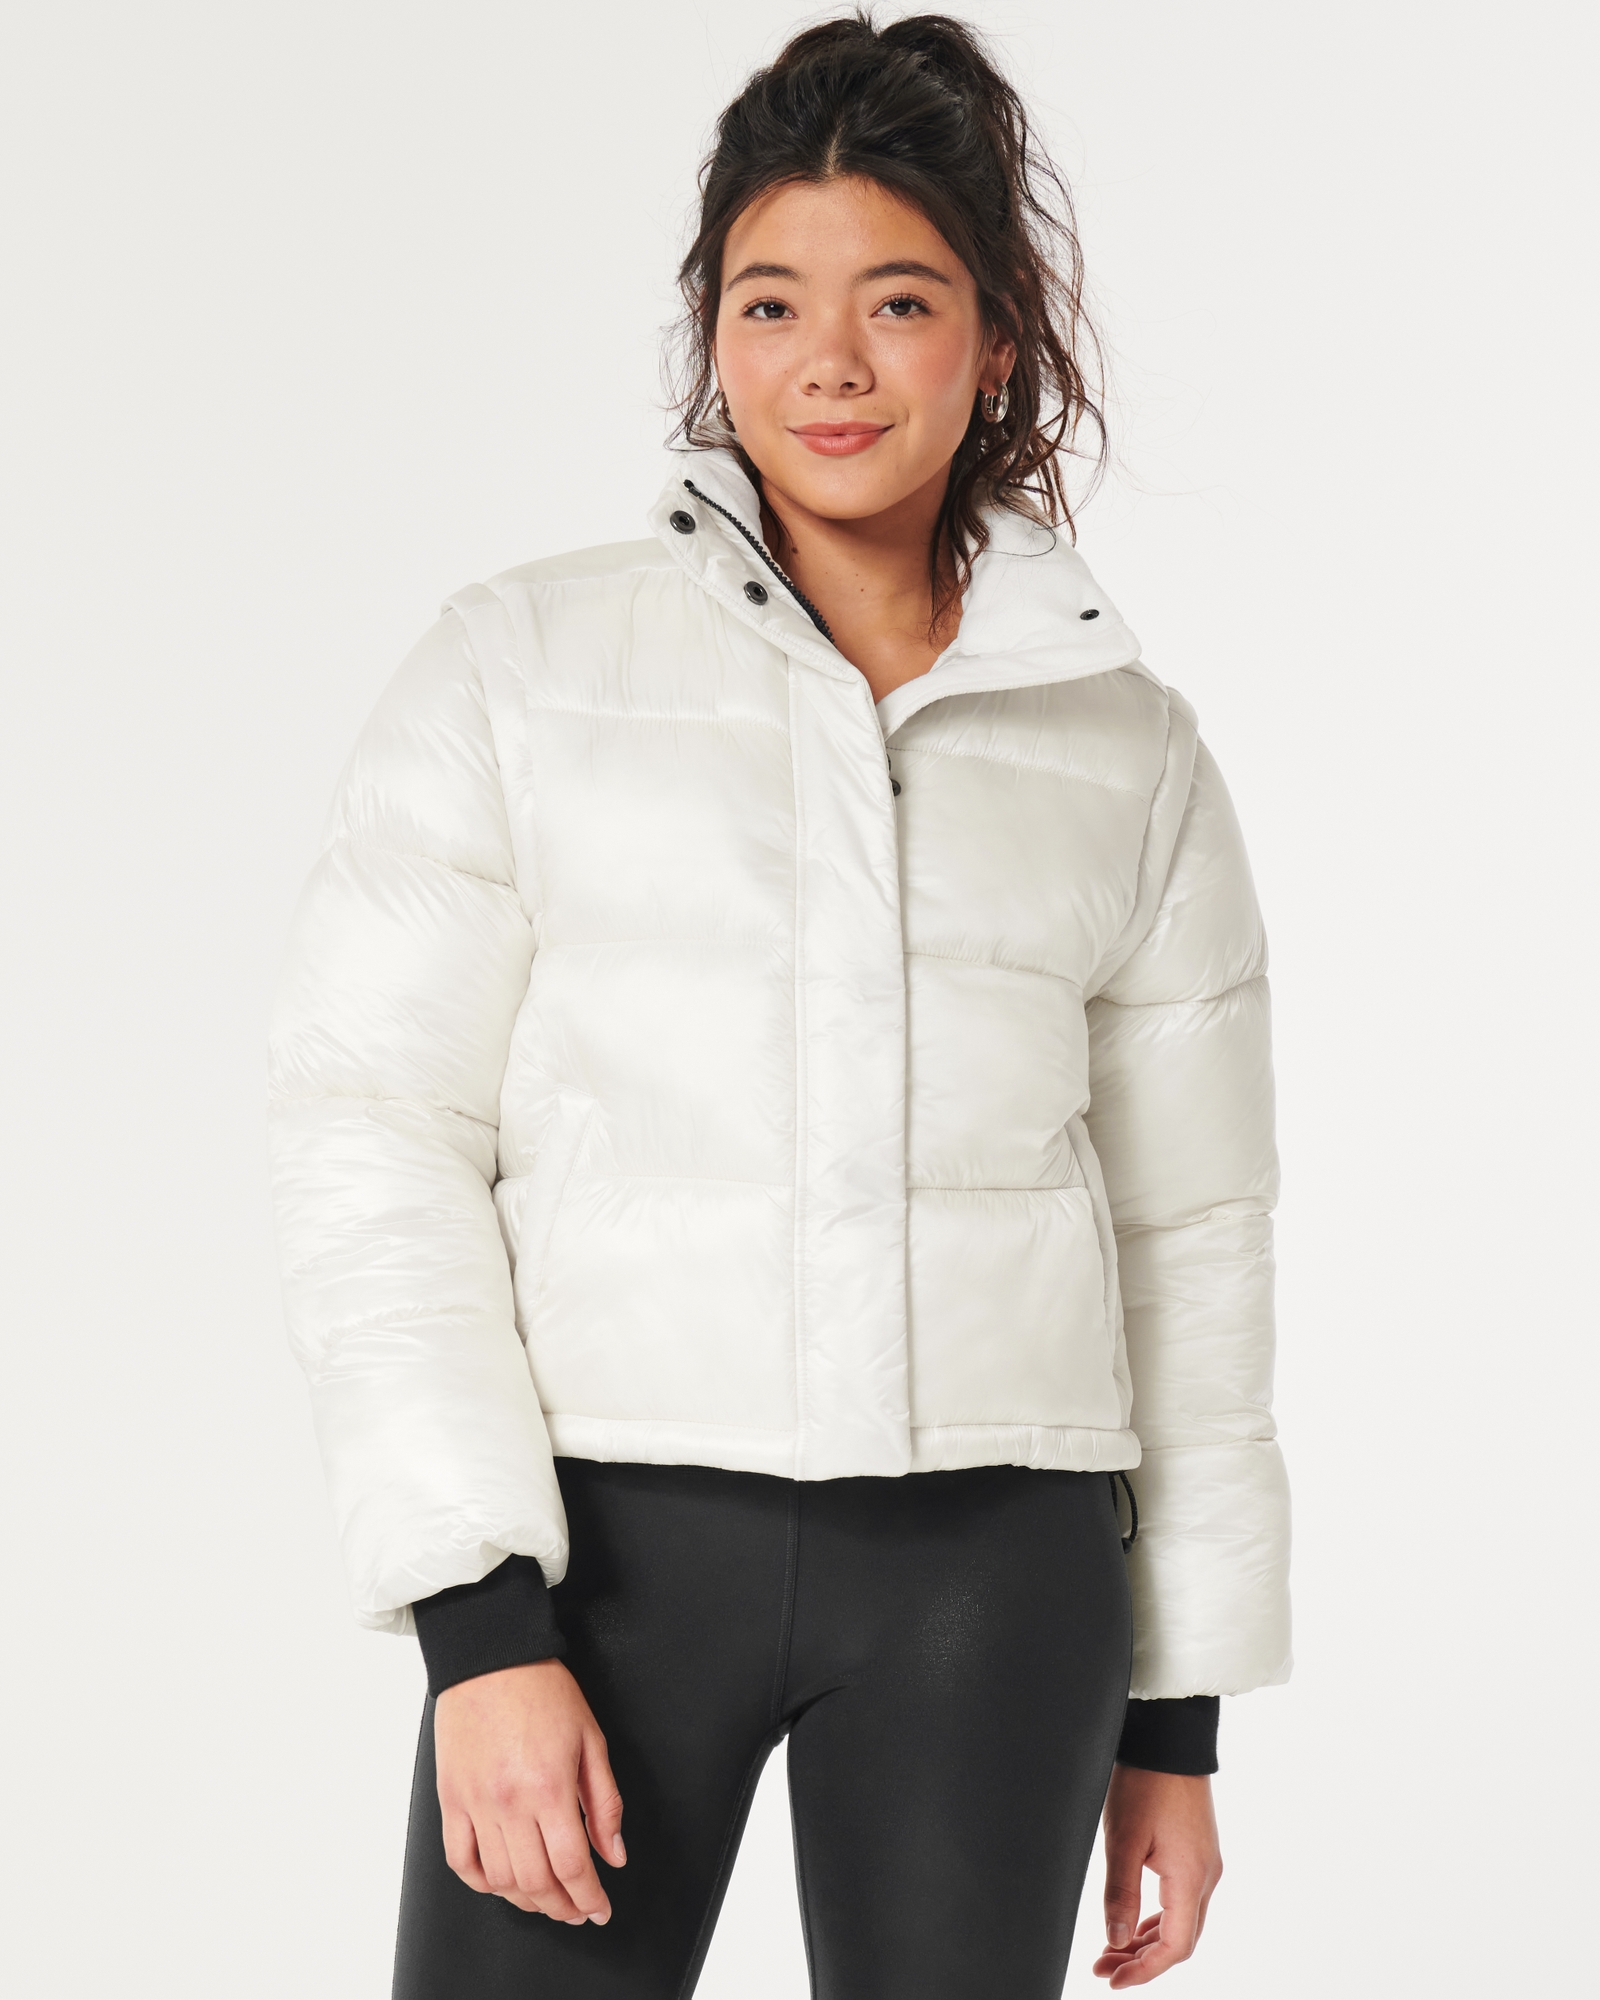 Hollister puffer jacket in blue cord